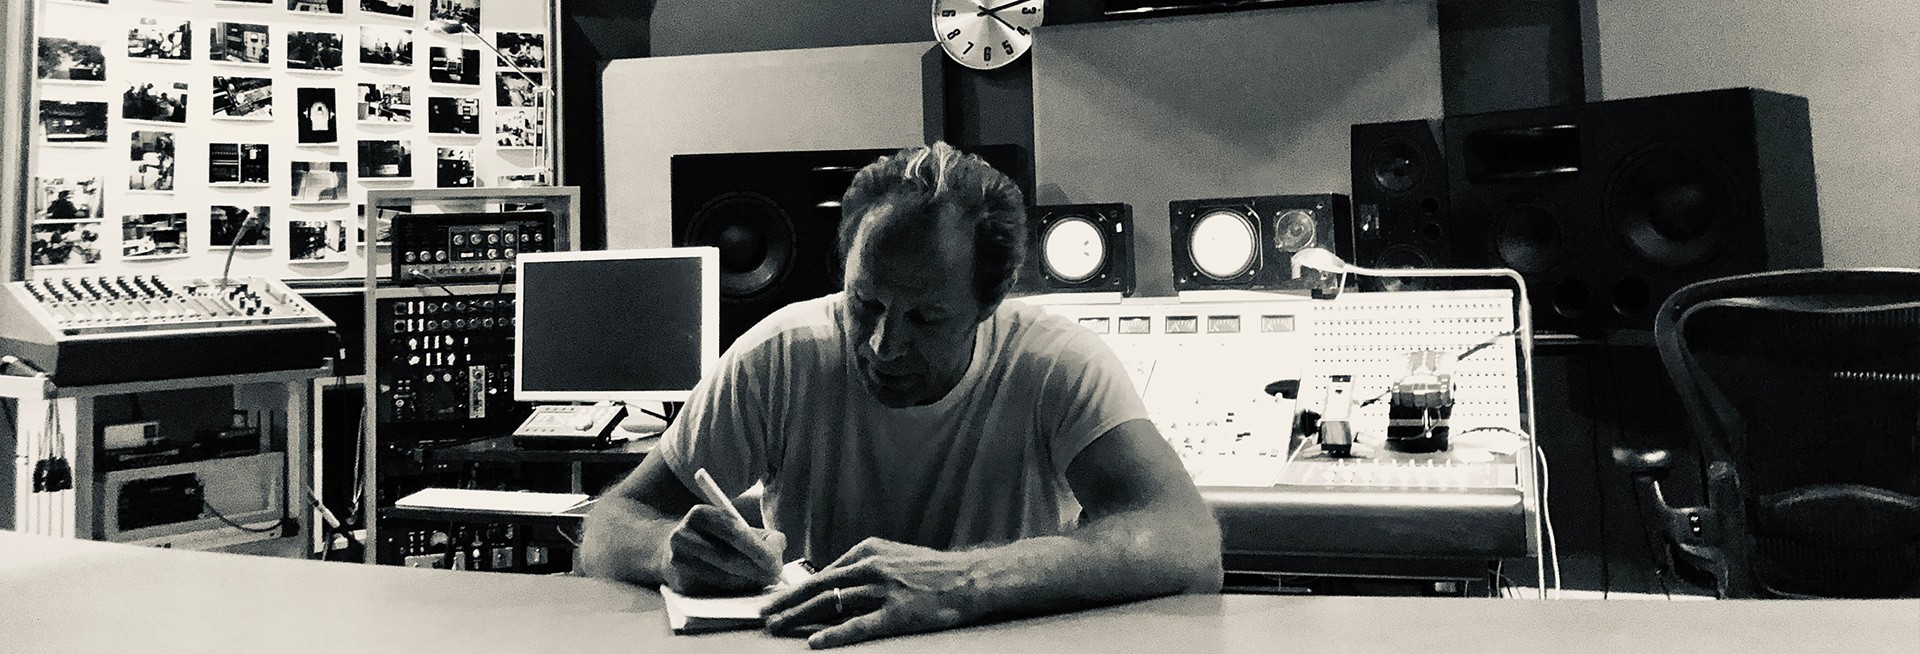 Charlie James writing a song in the recording studio closeup